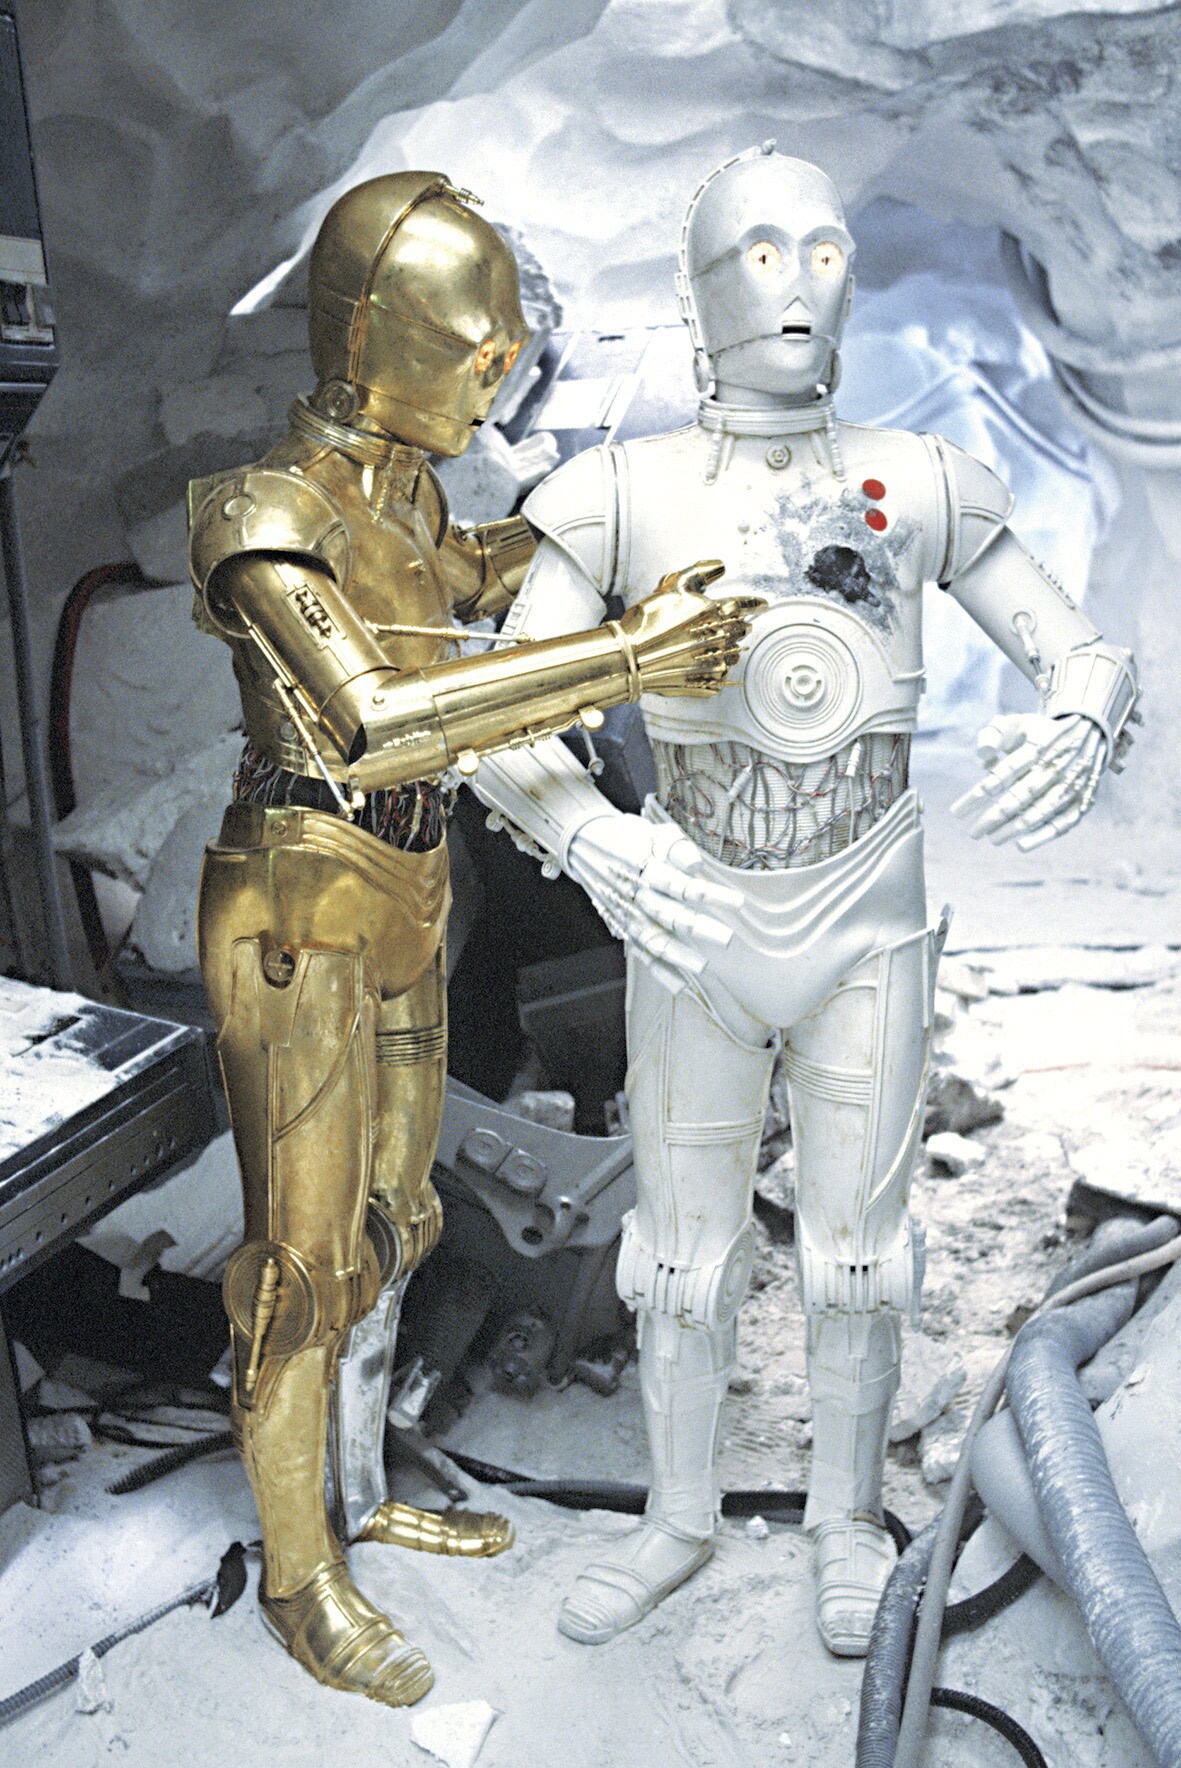 Star Wars: The Empire Strikes Back 40th Anniversary Special excerpt - C-3PO